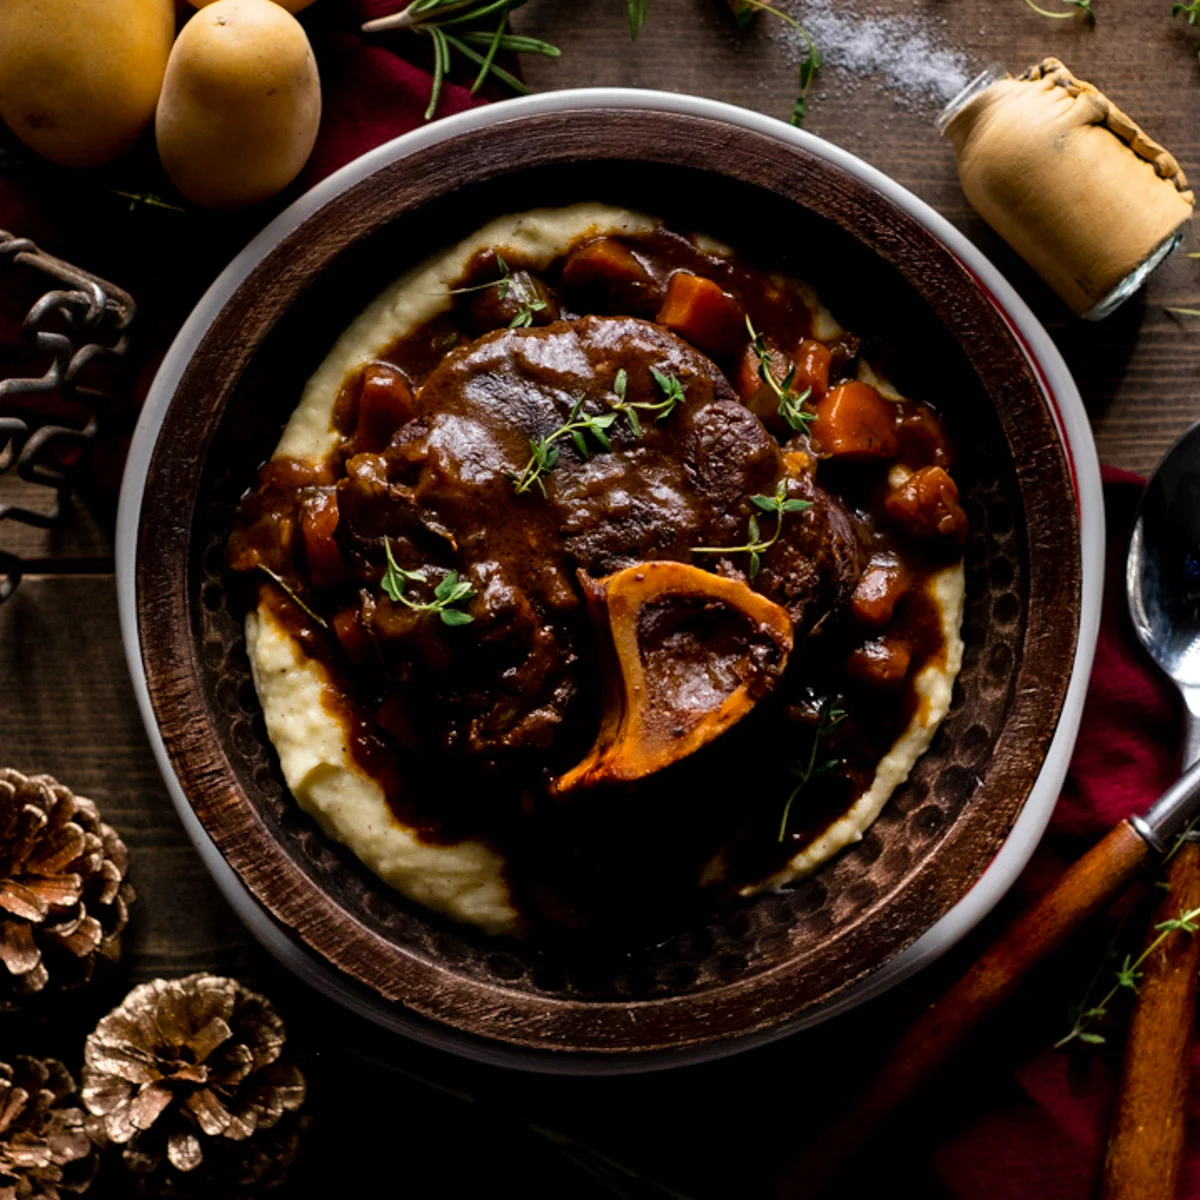 elk osso buco over mashed potatoes